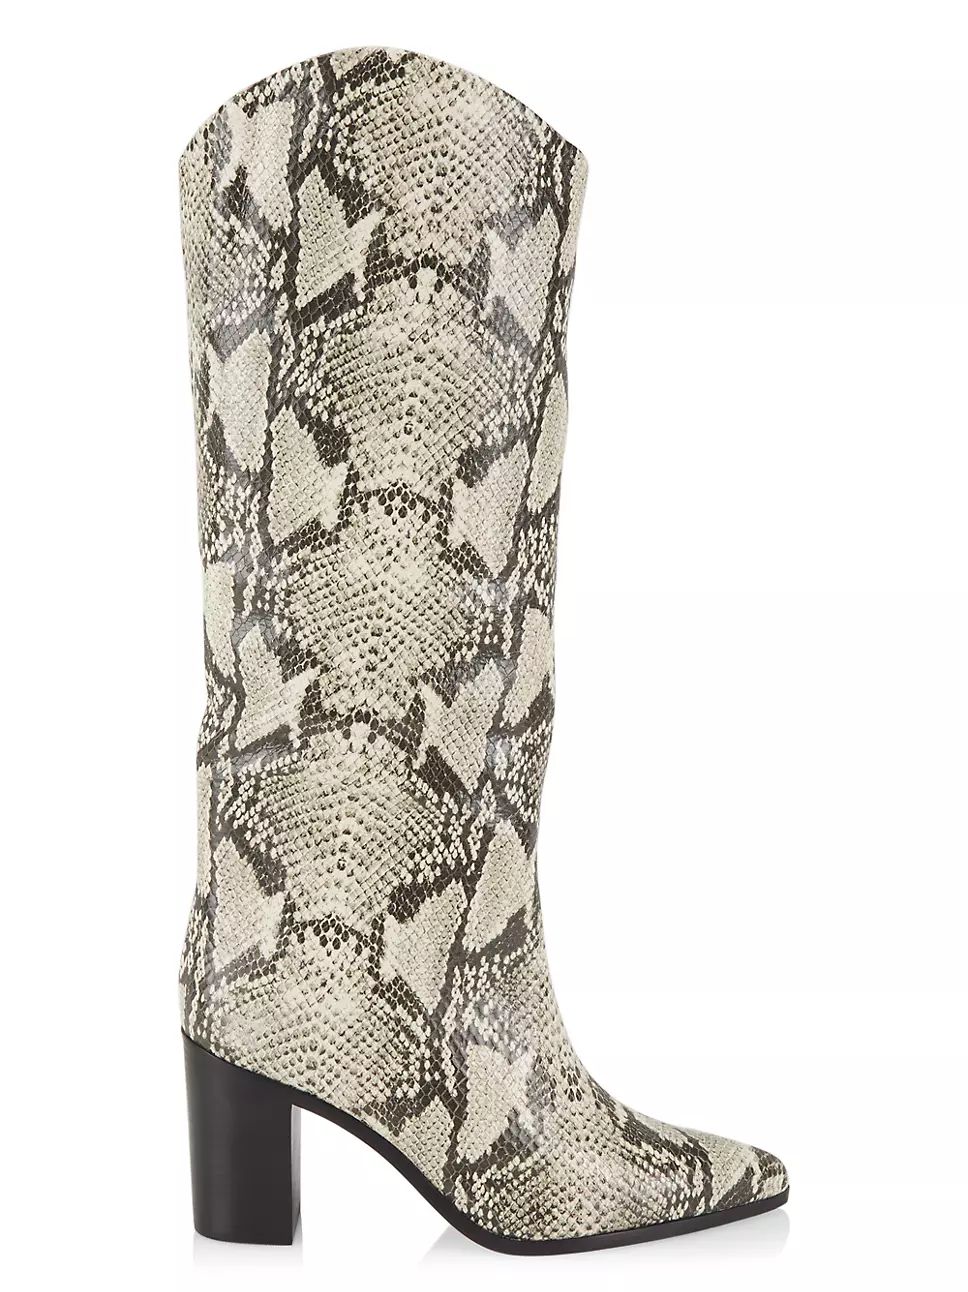 Analeah Snake-Embossed Leather Tall Boots | Saks Fifth Avenue